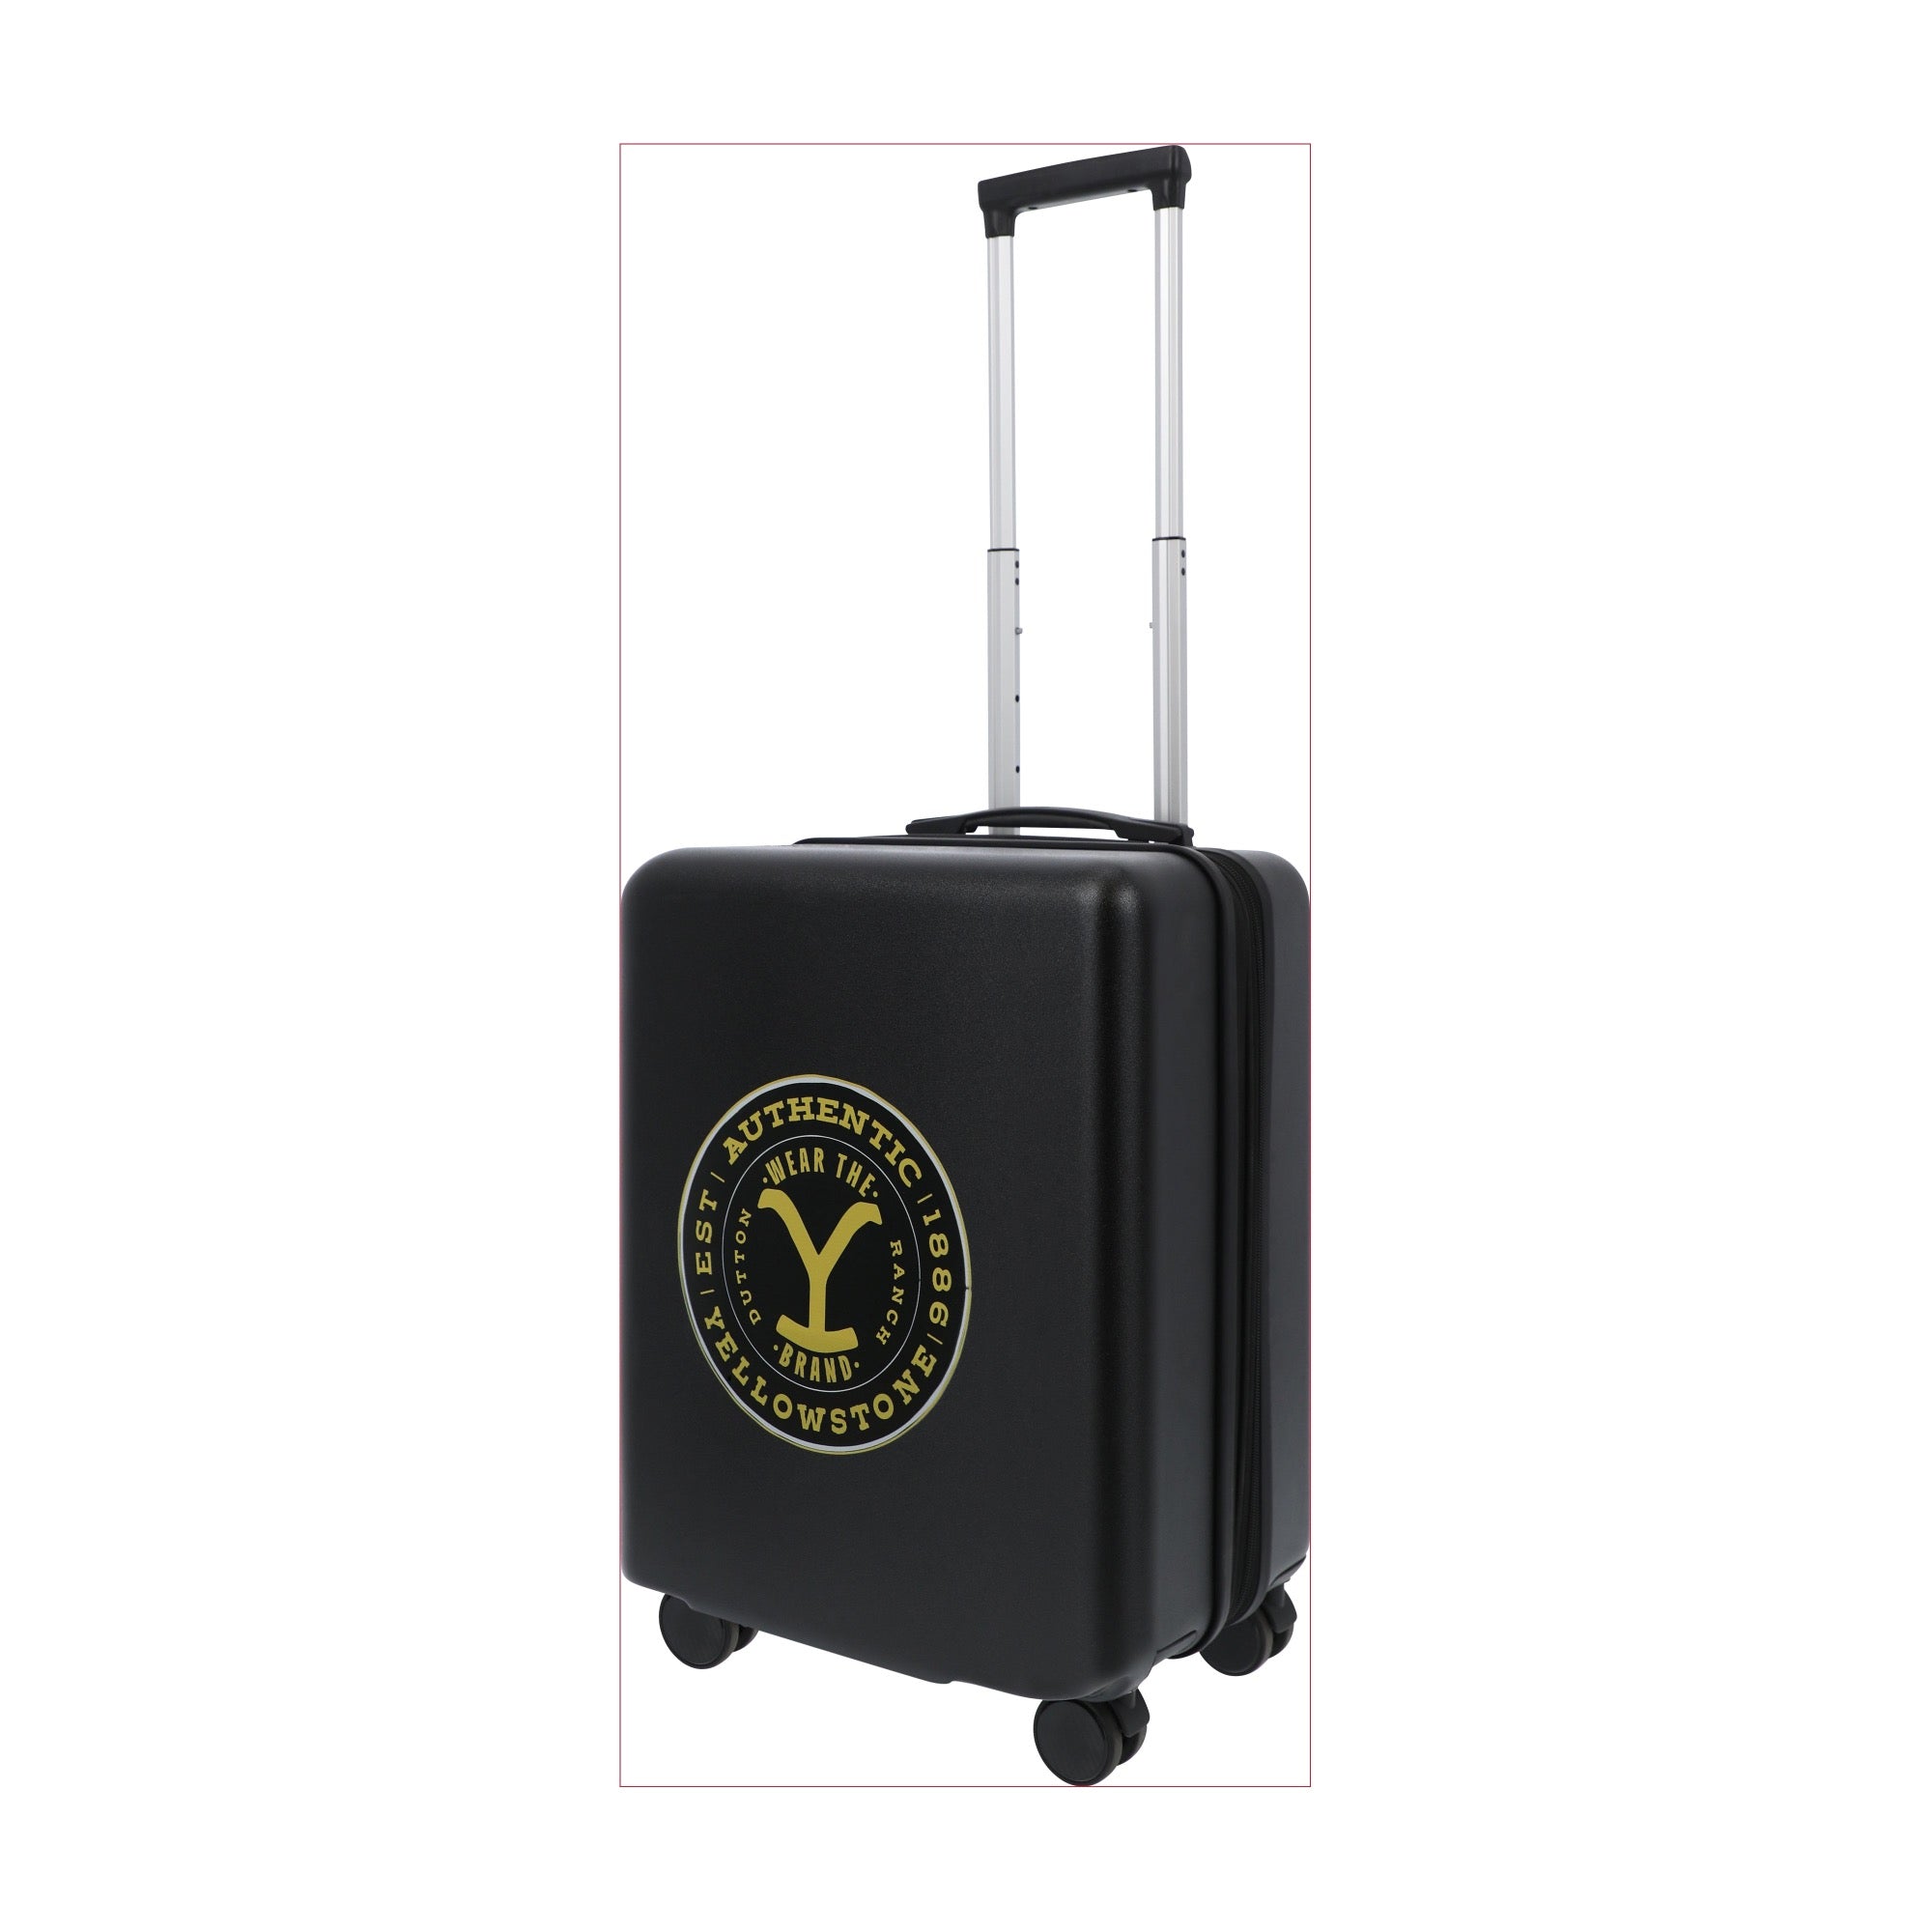 Black paramount yellowstone 22.5" carry-on spinner suitcase luggage by Ful